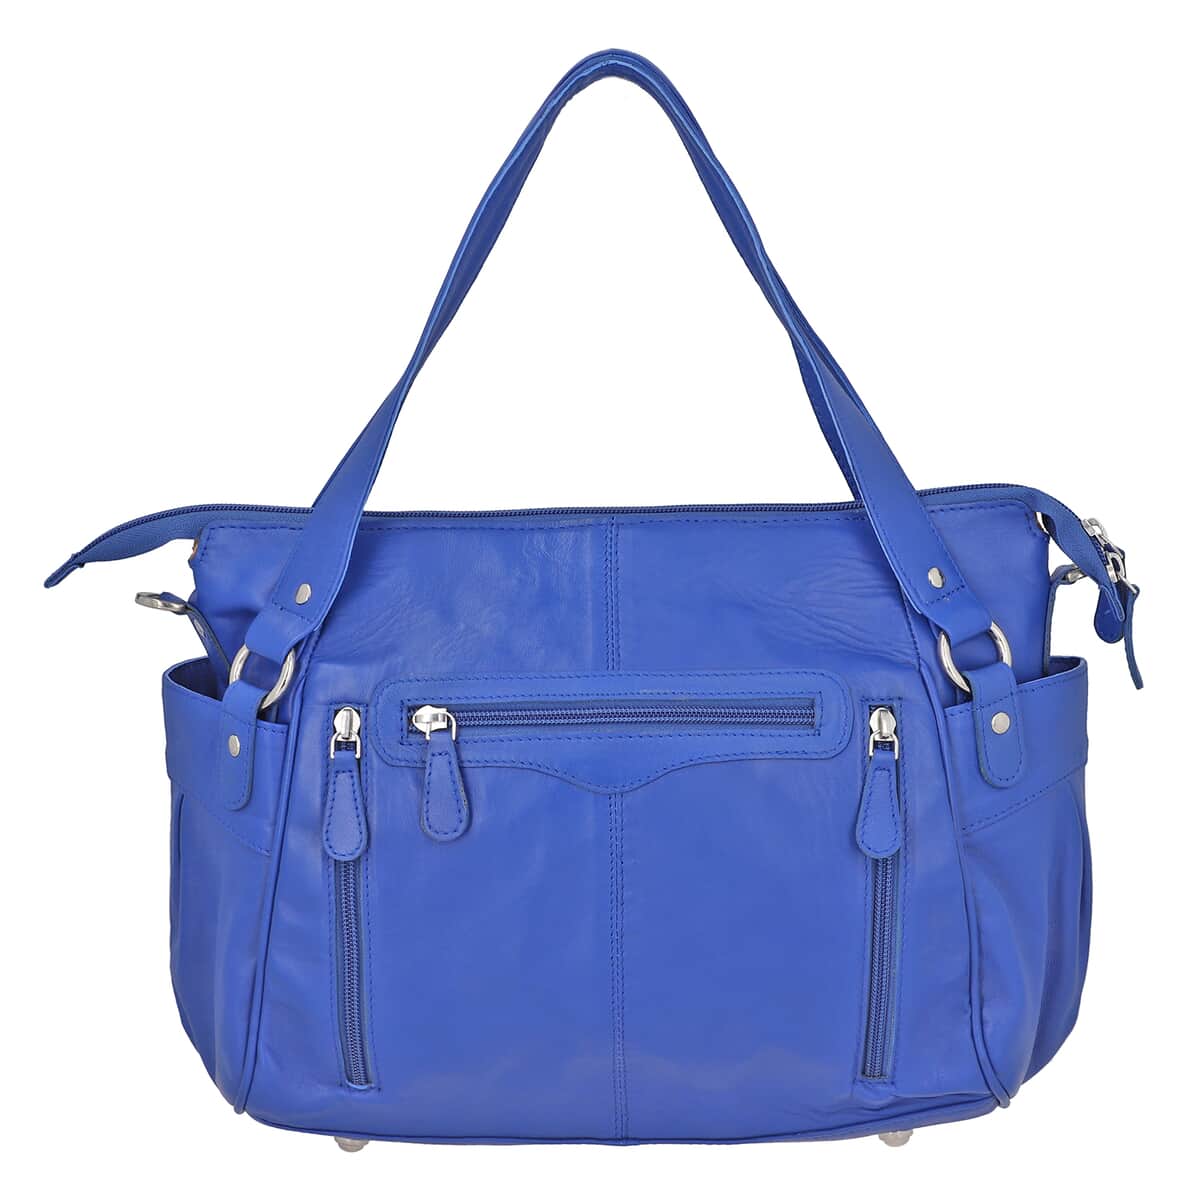 Buy Blue Genuine Leather RFID Protected Bailey Bag at ShopLC.